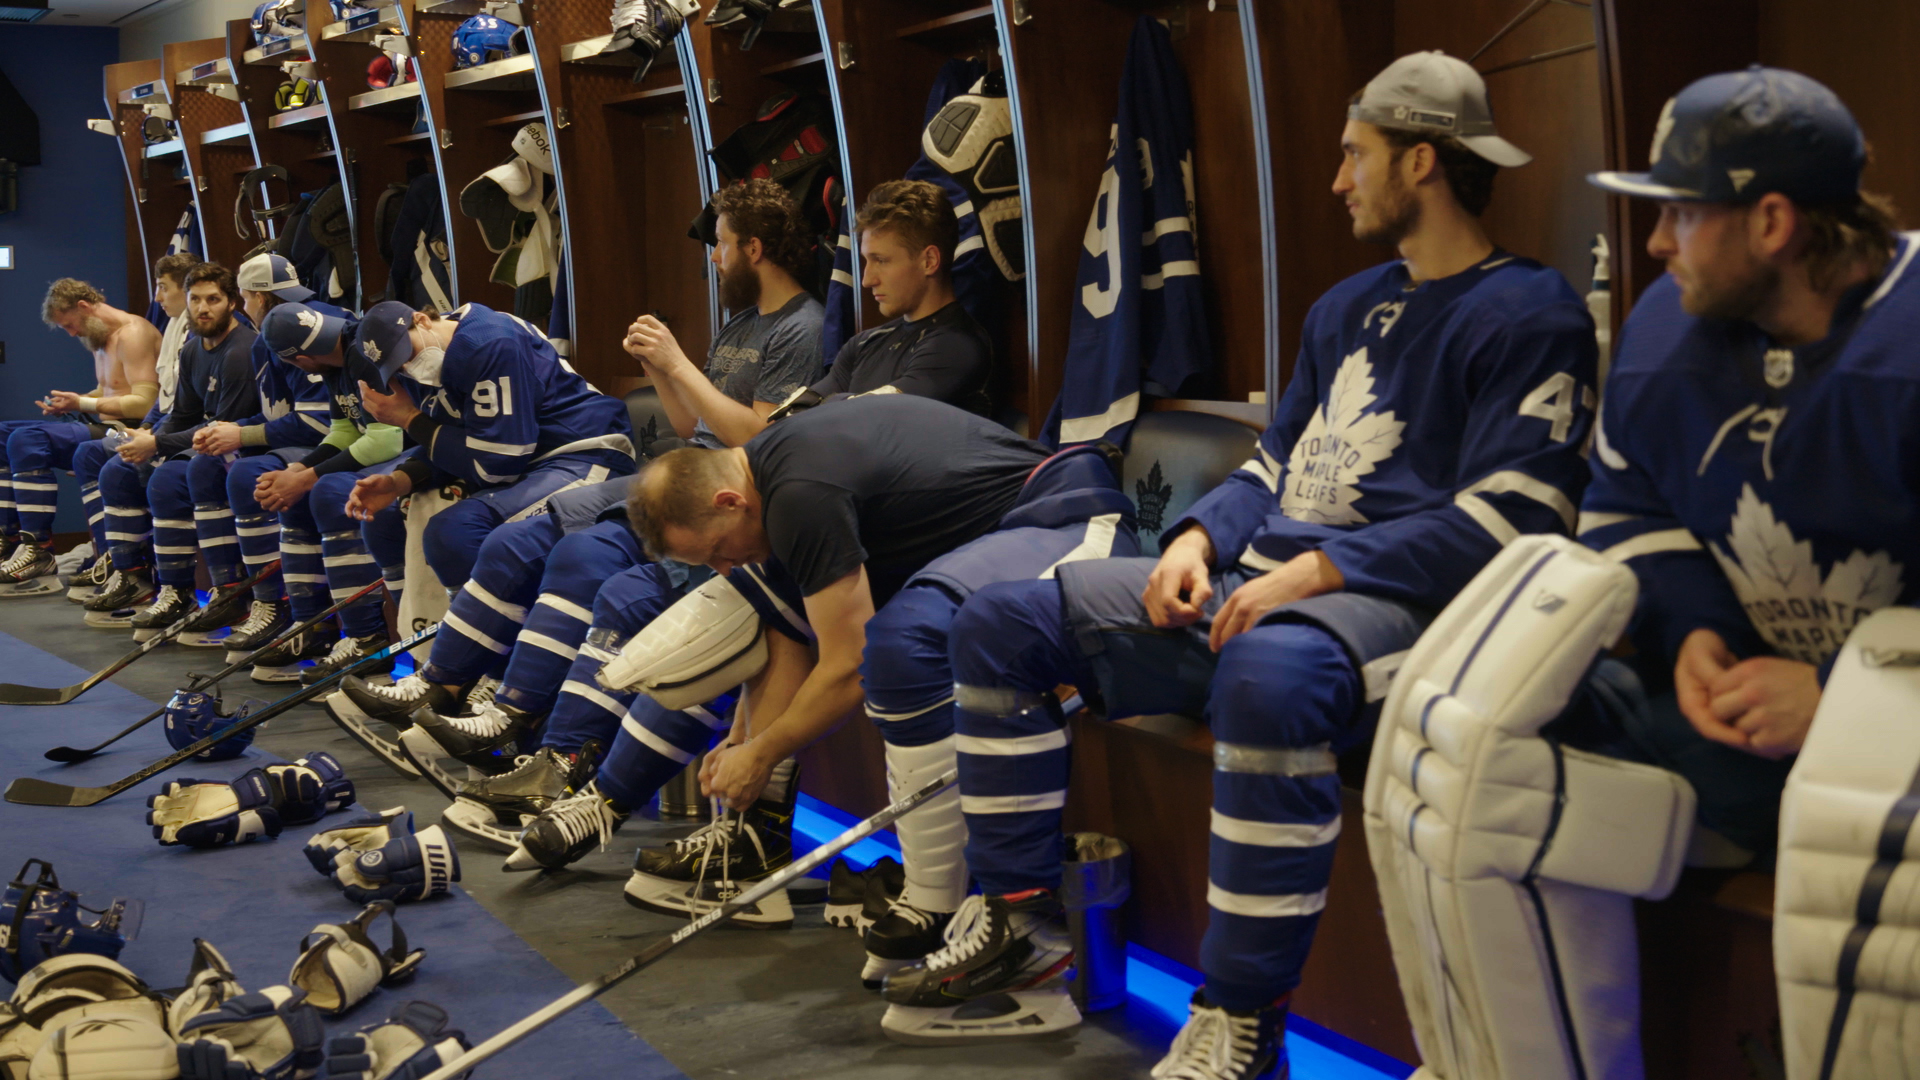 All Or Nothing Toronto Maple Leafs Release Date Trailer For Amazon Original Docuseries On 21 Season Sporting News Canada